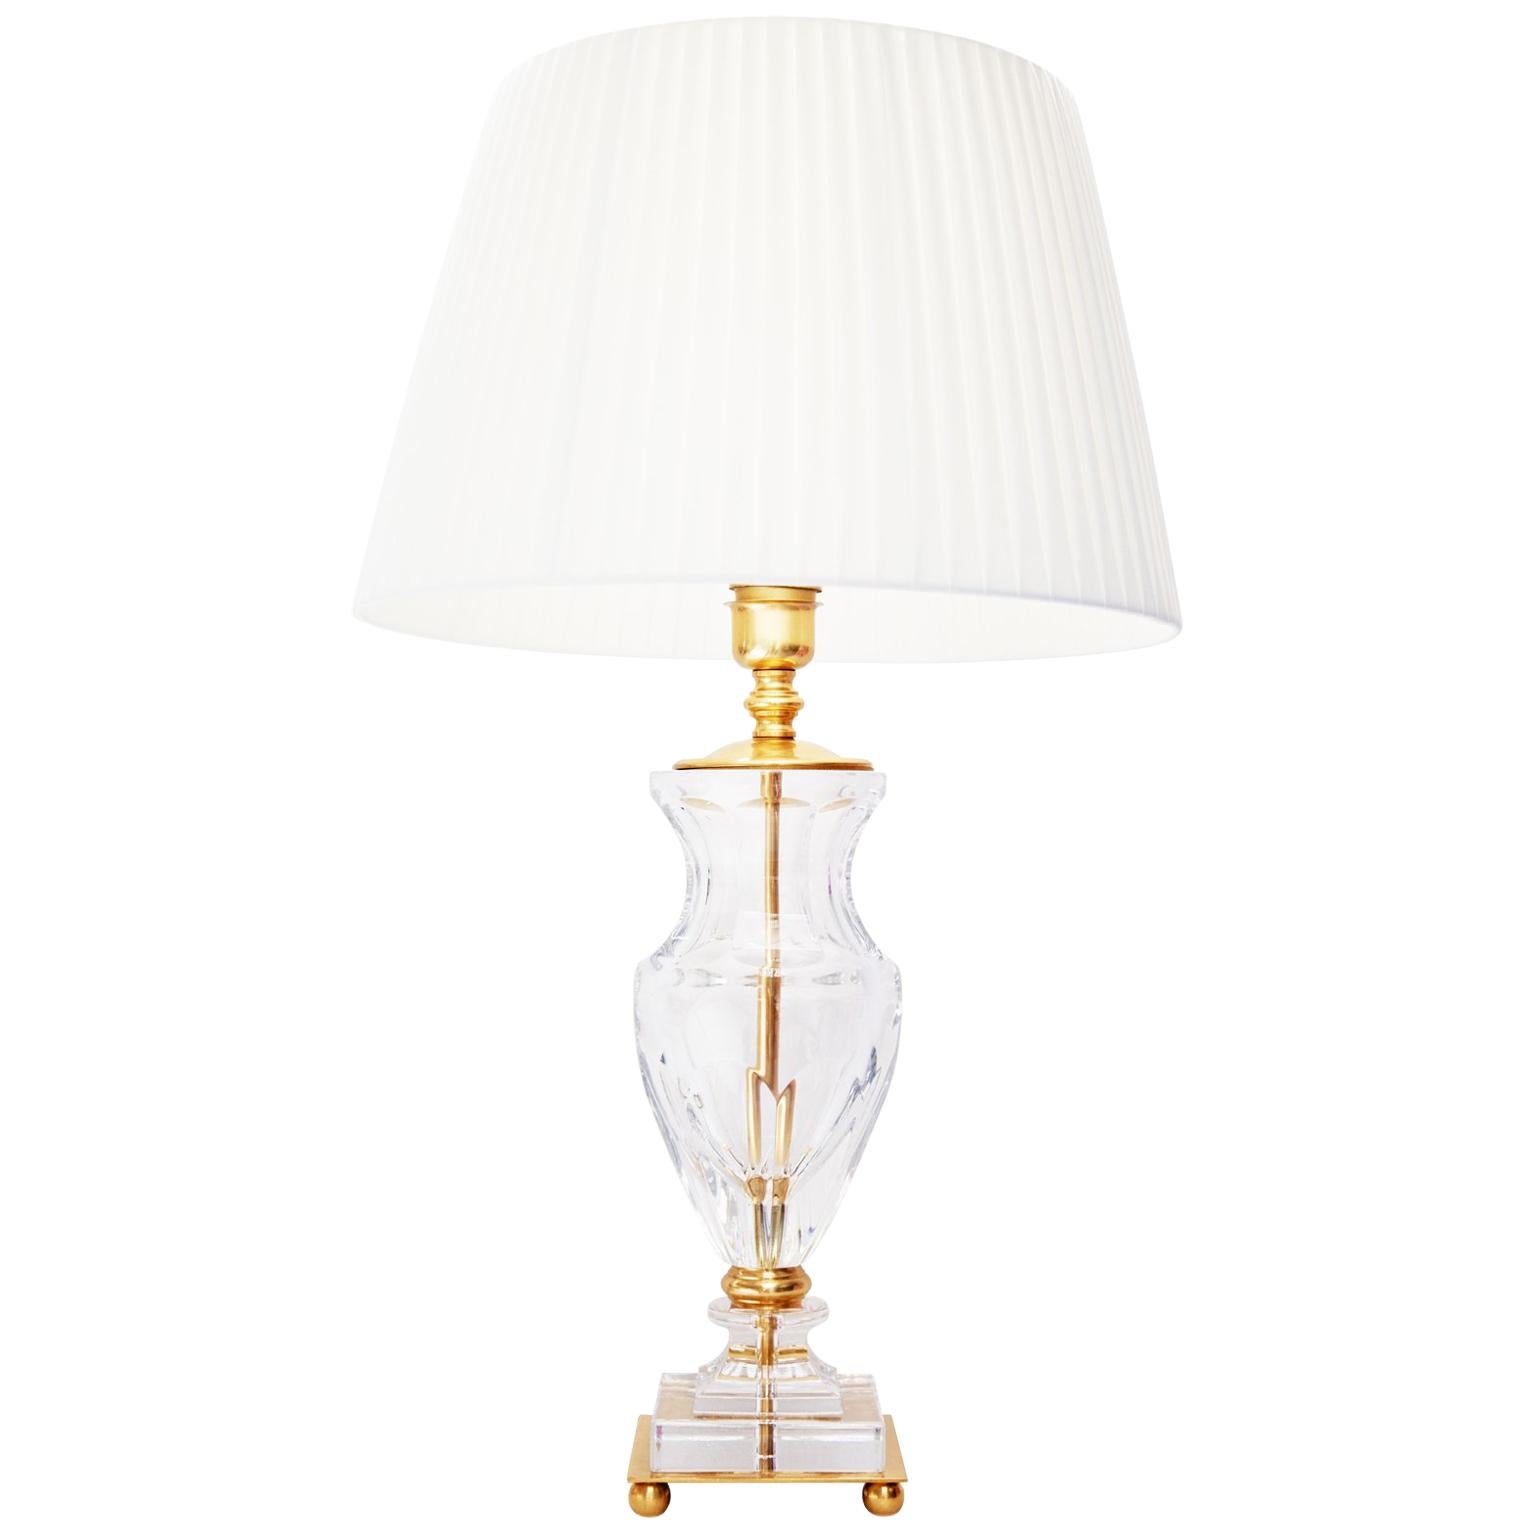 Ugo Poggi Firenze Handcrafted Crystal and Gold "Vinci" Italian Table Lamp  For Sale